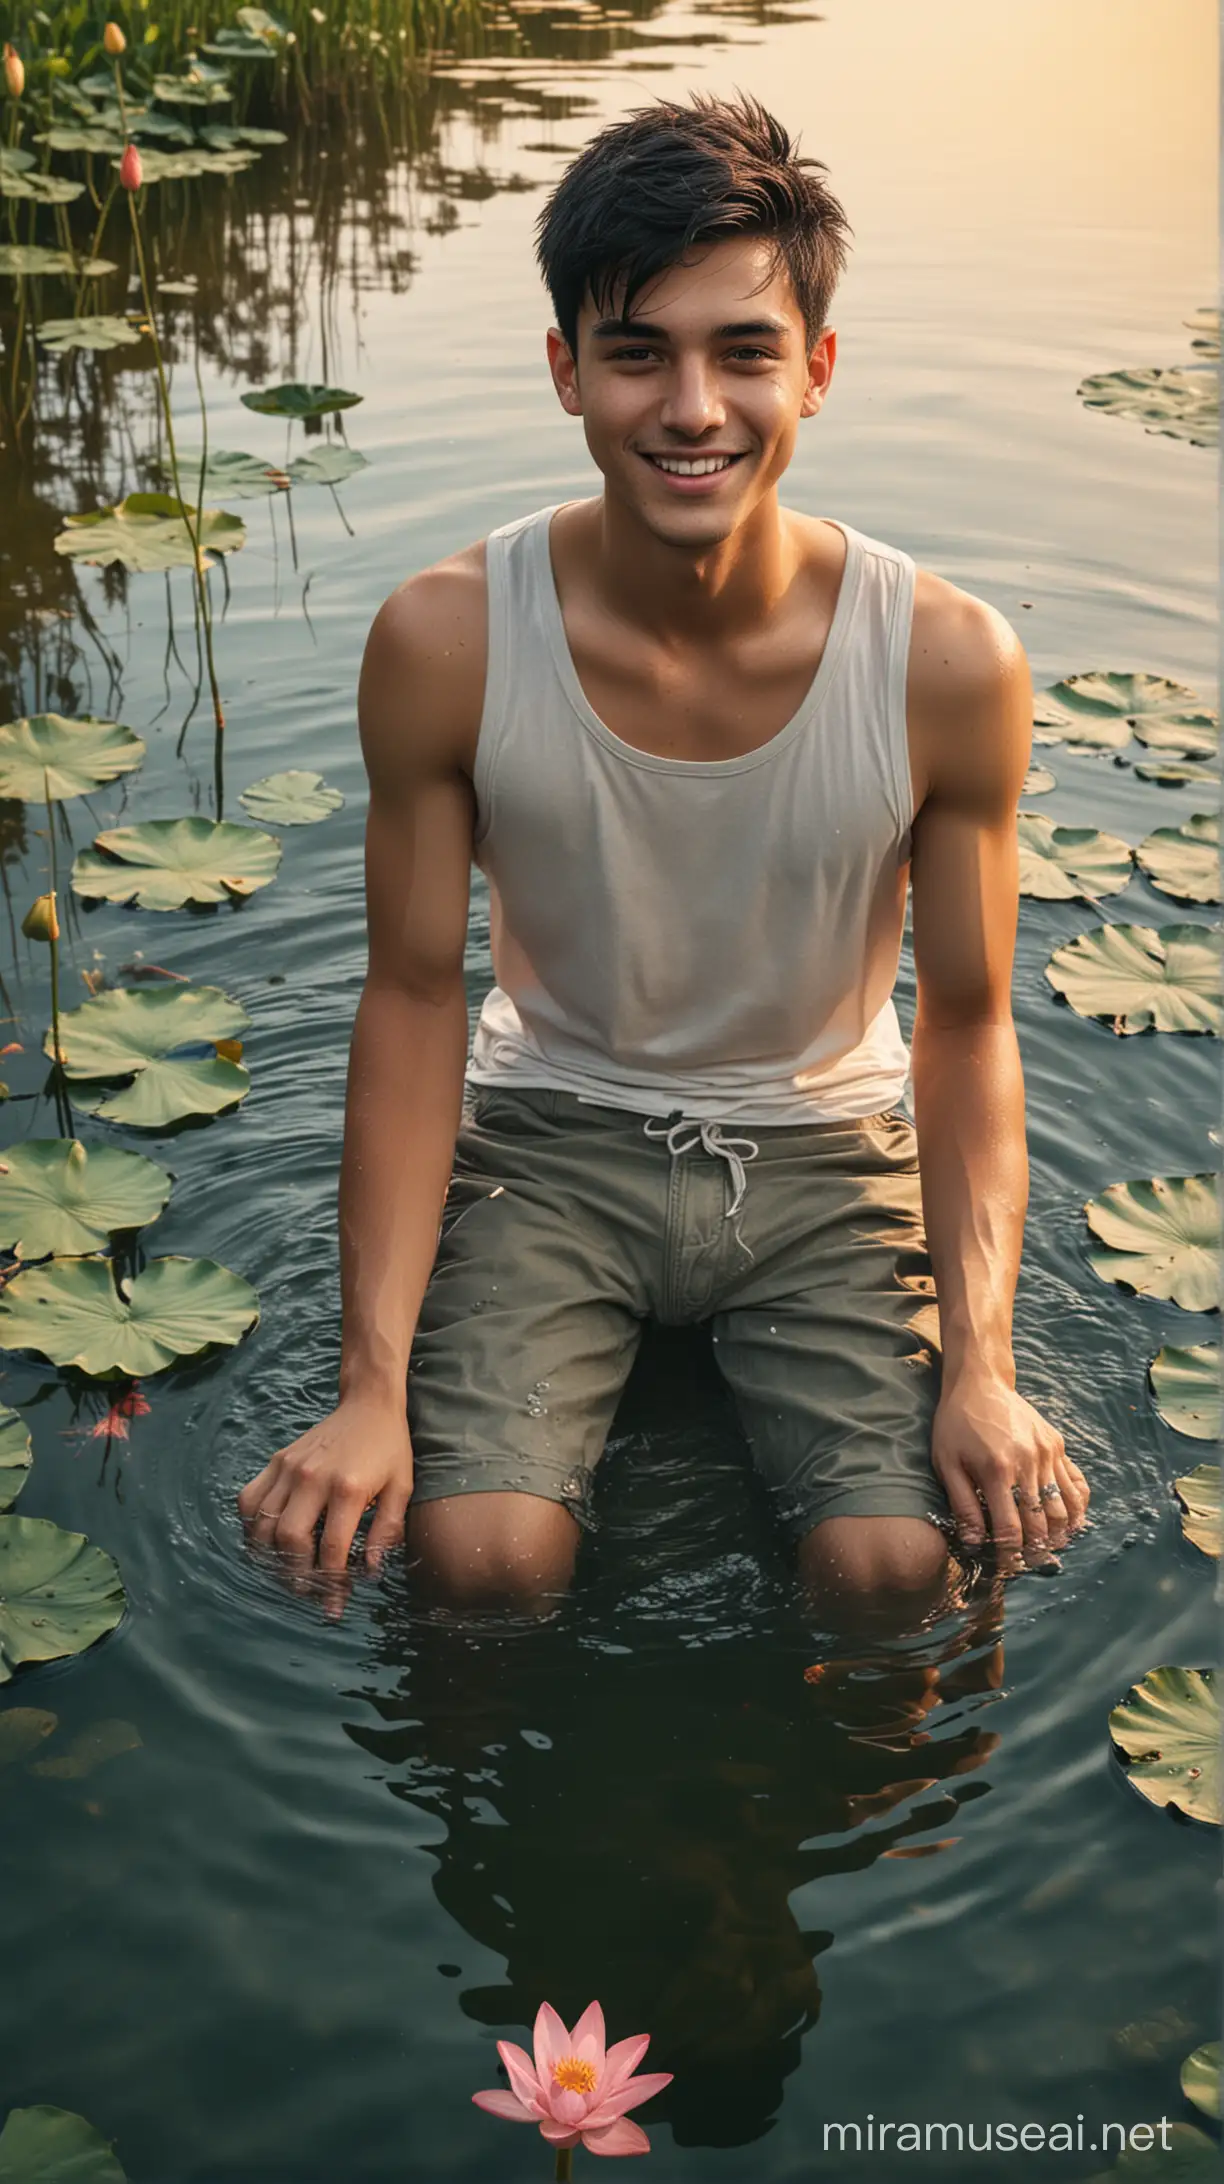 Smiling Young Man Sitting on Lotus Flowers Over Clear Lake at Sunset